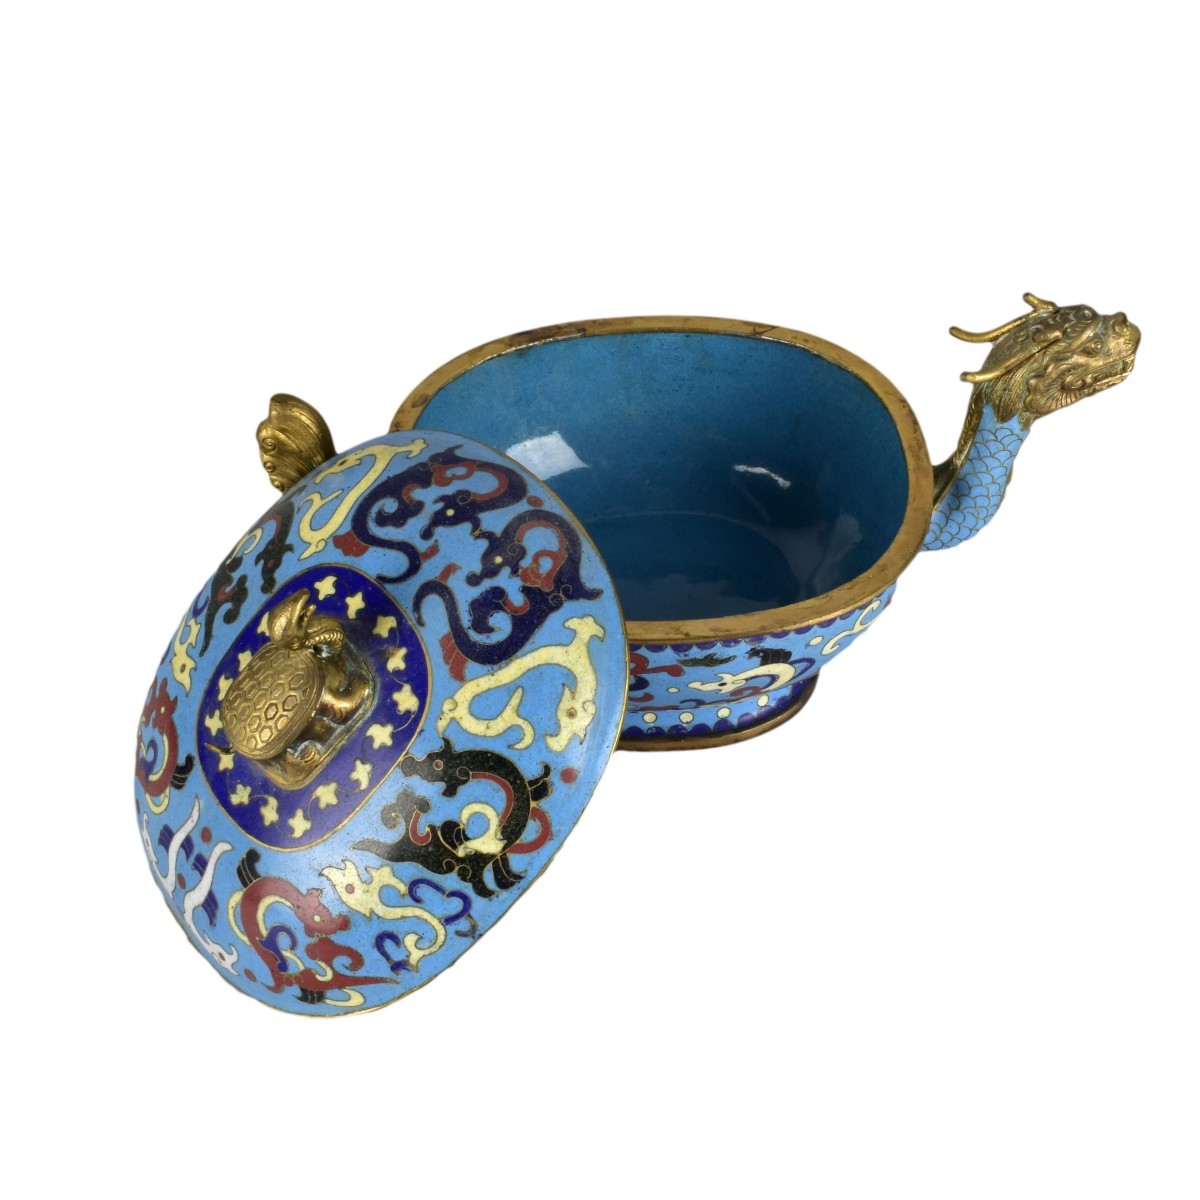 Chinese Cloisonne Enamel Covered Pot